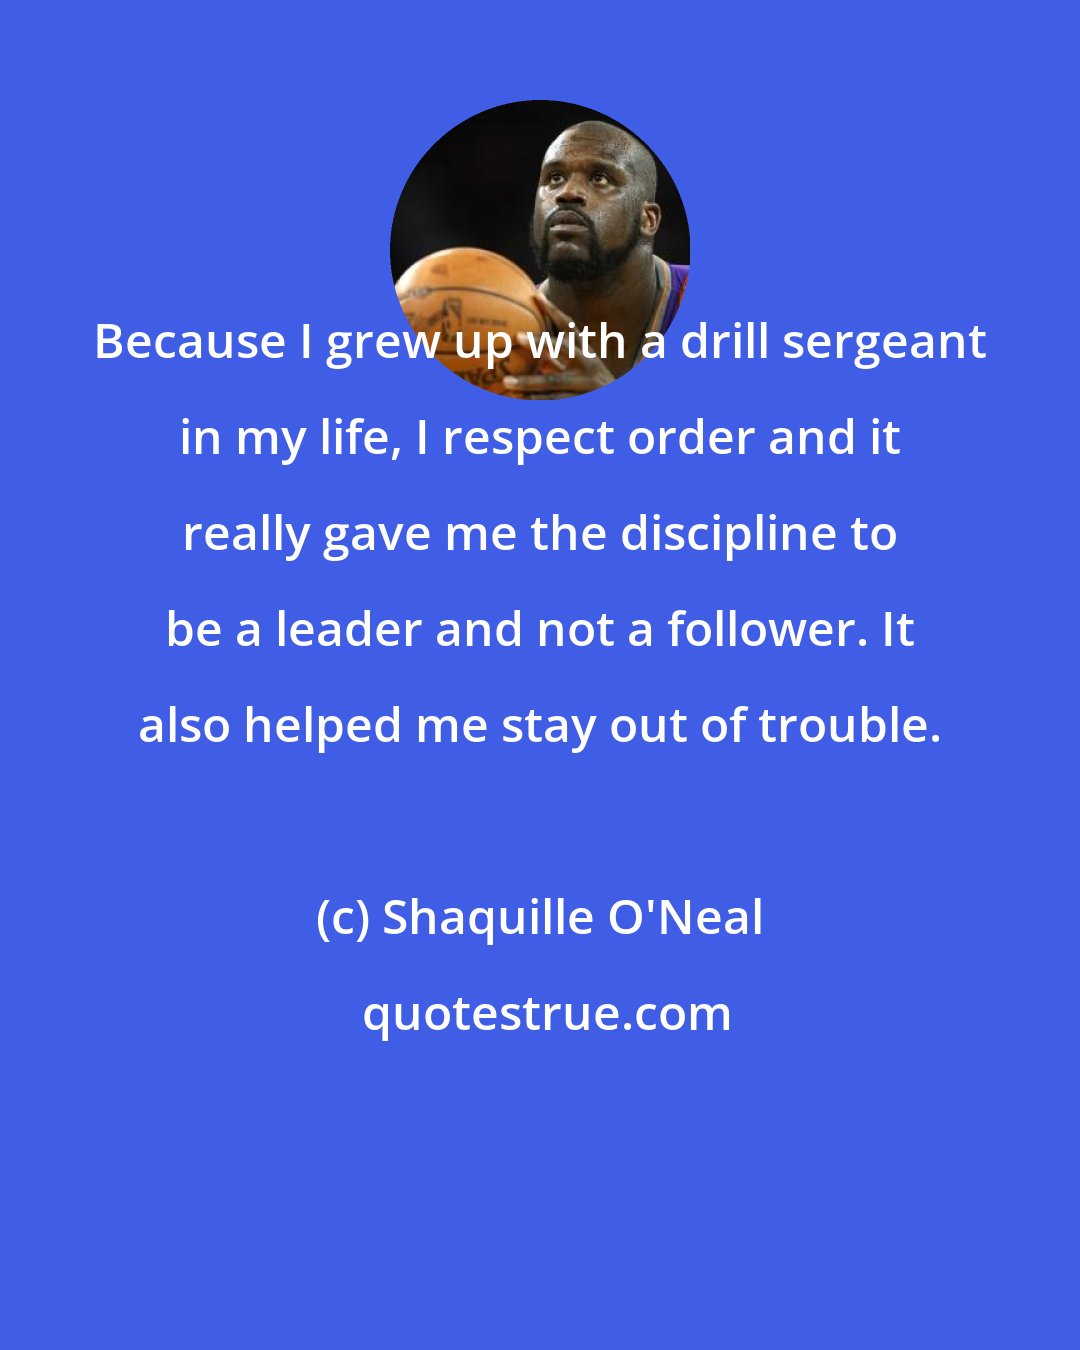 Shaquille O'Neal: Because I grew up with a drill sergeant in my life, I respect order and it really gave me the discipline to be a leader and not a follower. It also helped me stay out of trouble.